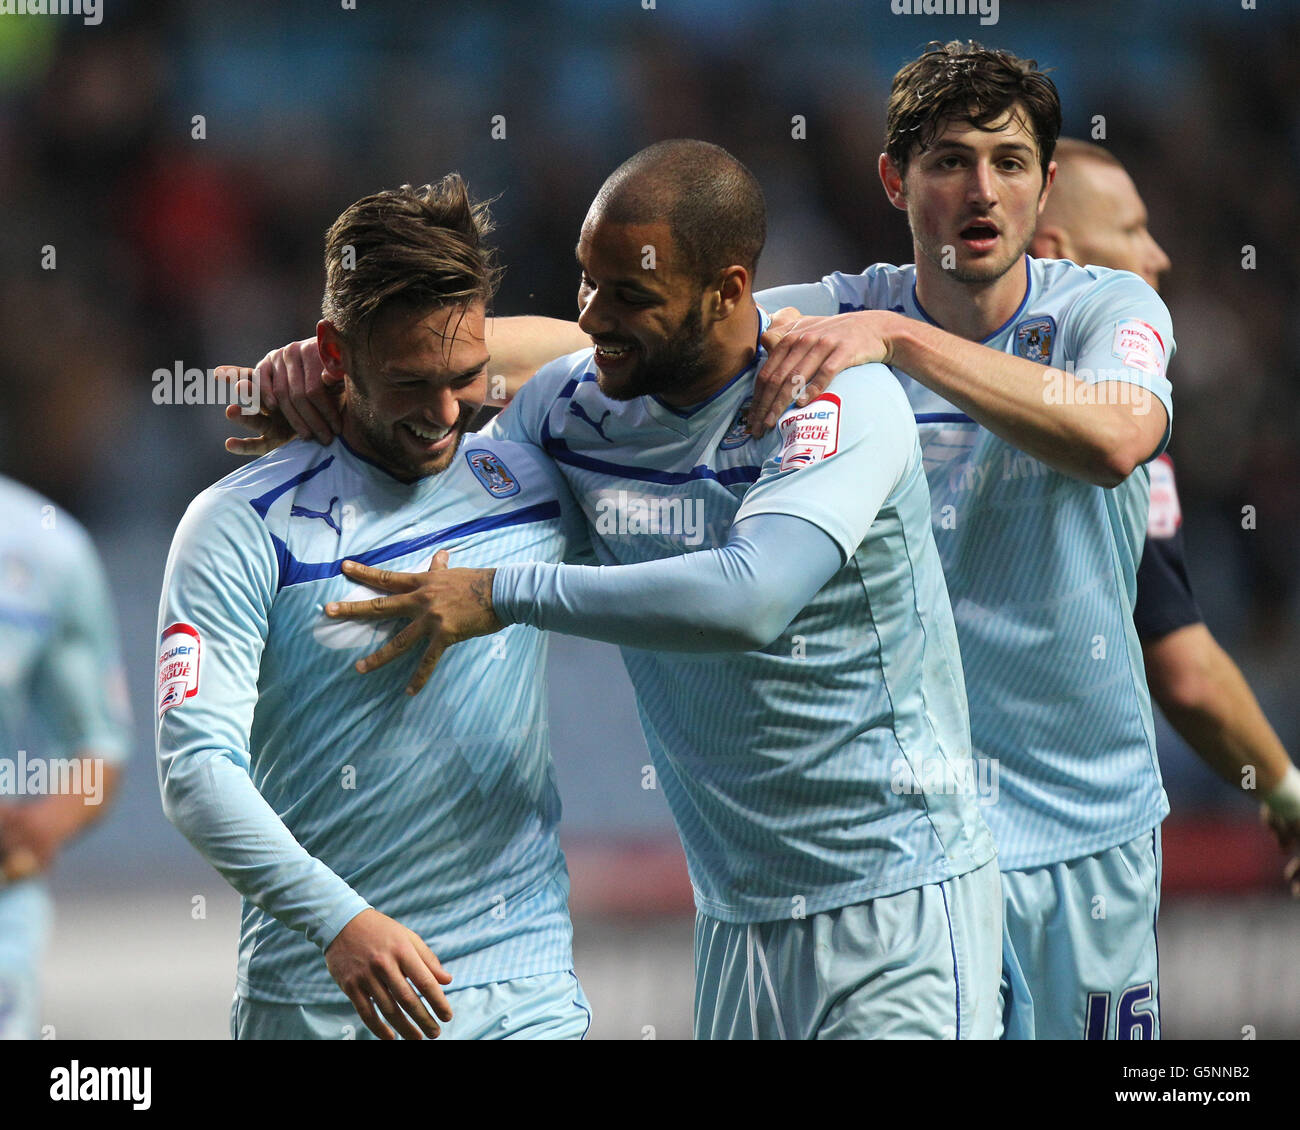 Coventry City's James Bailey is congratulated on scoring by David McGoldrick during the npower Football League one match at the Ricoh Arena, Coventry. Stock Photo